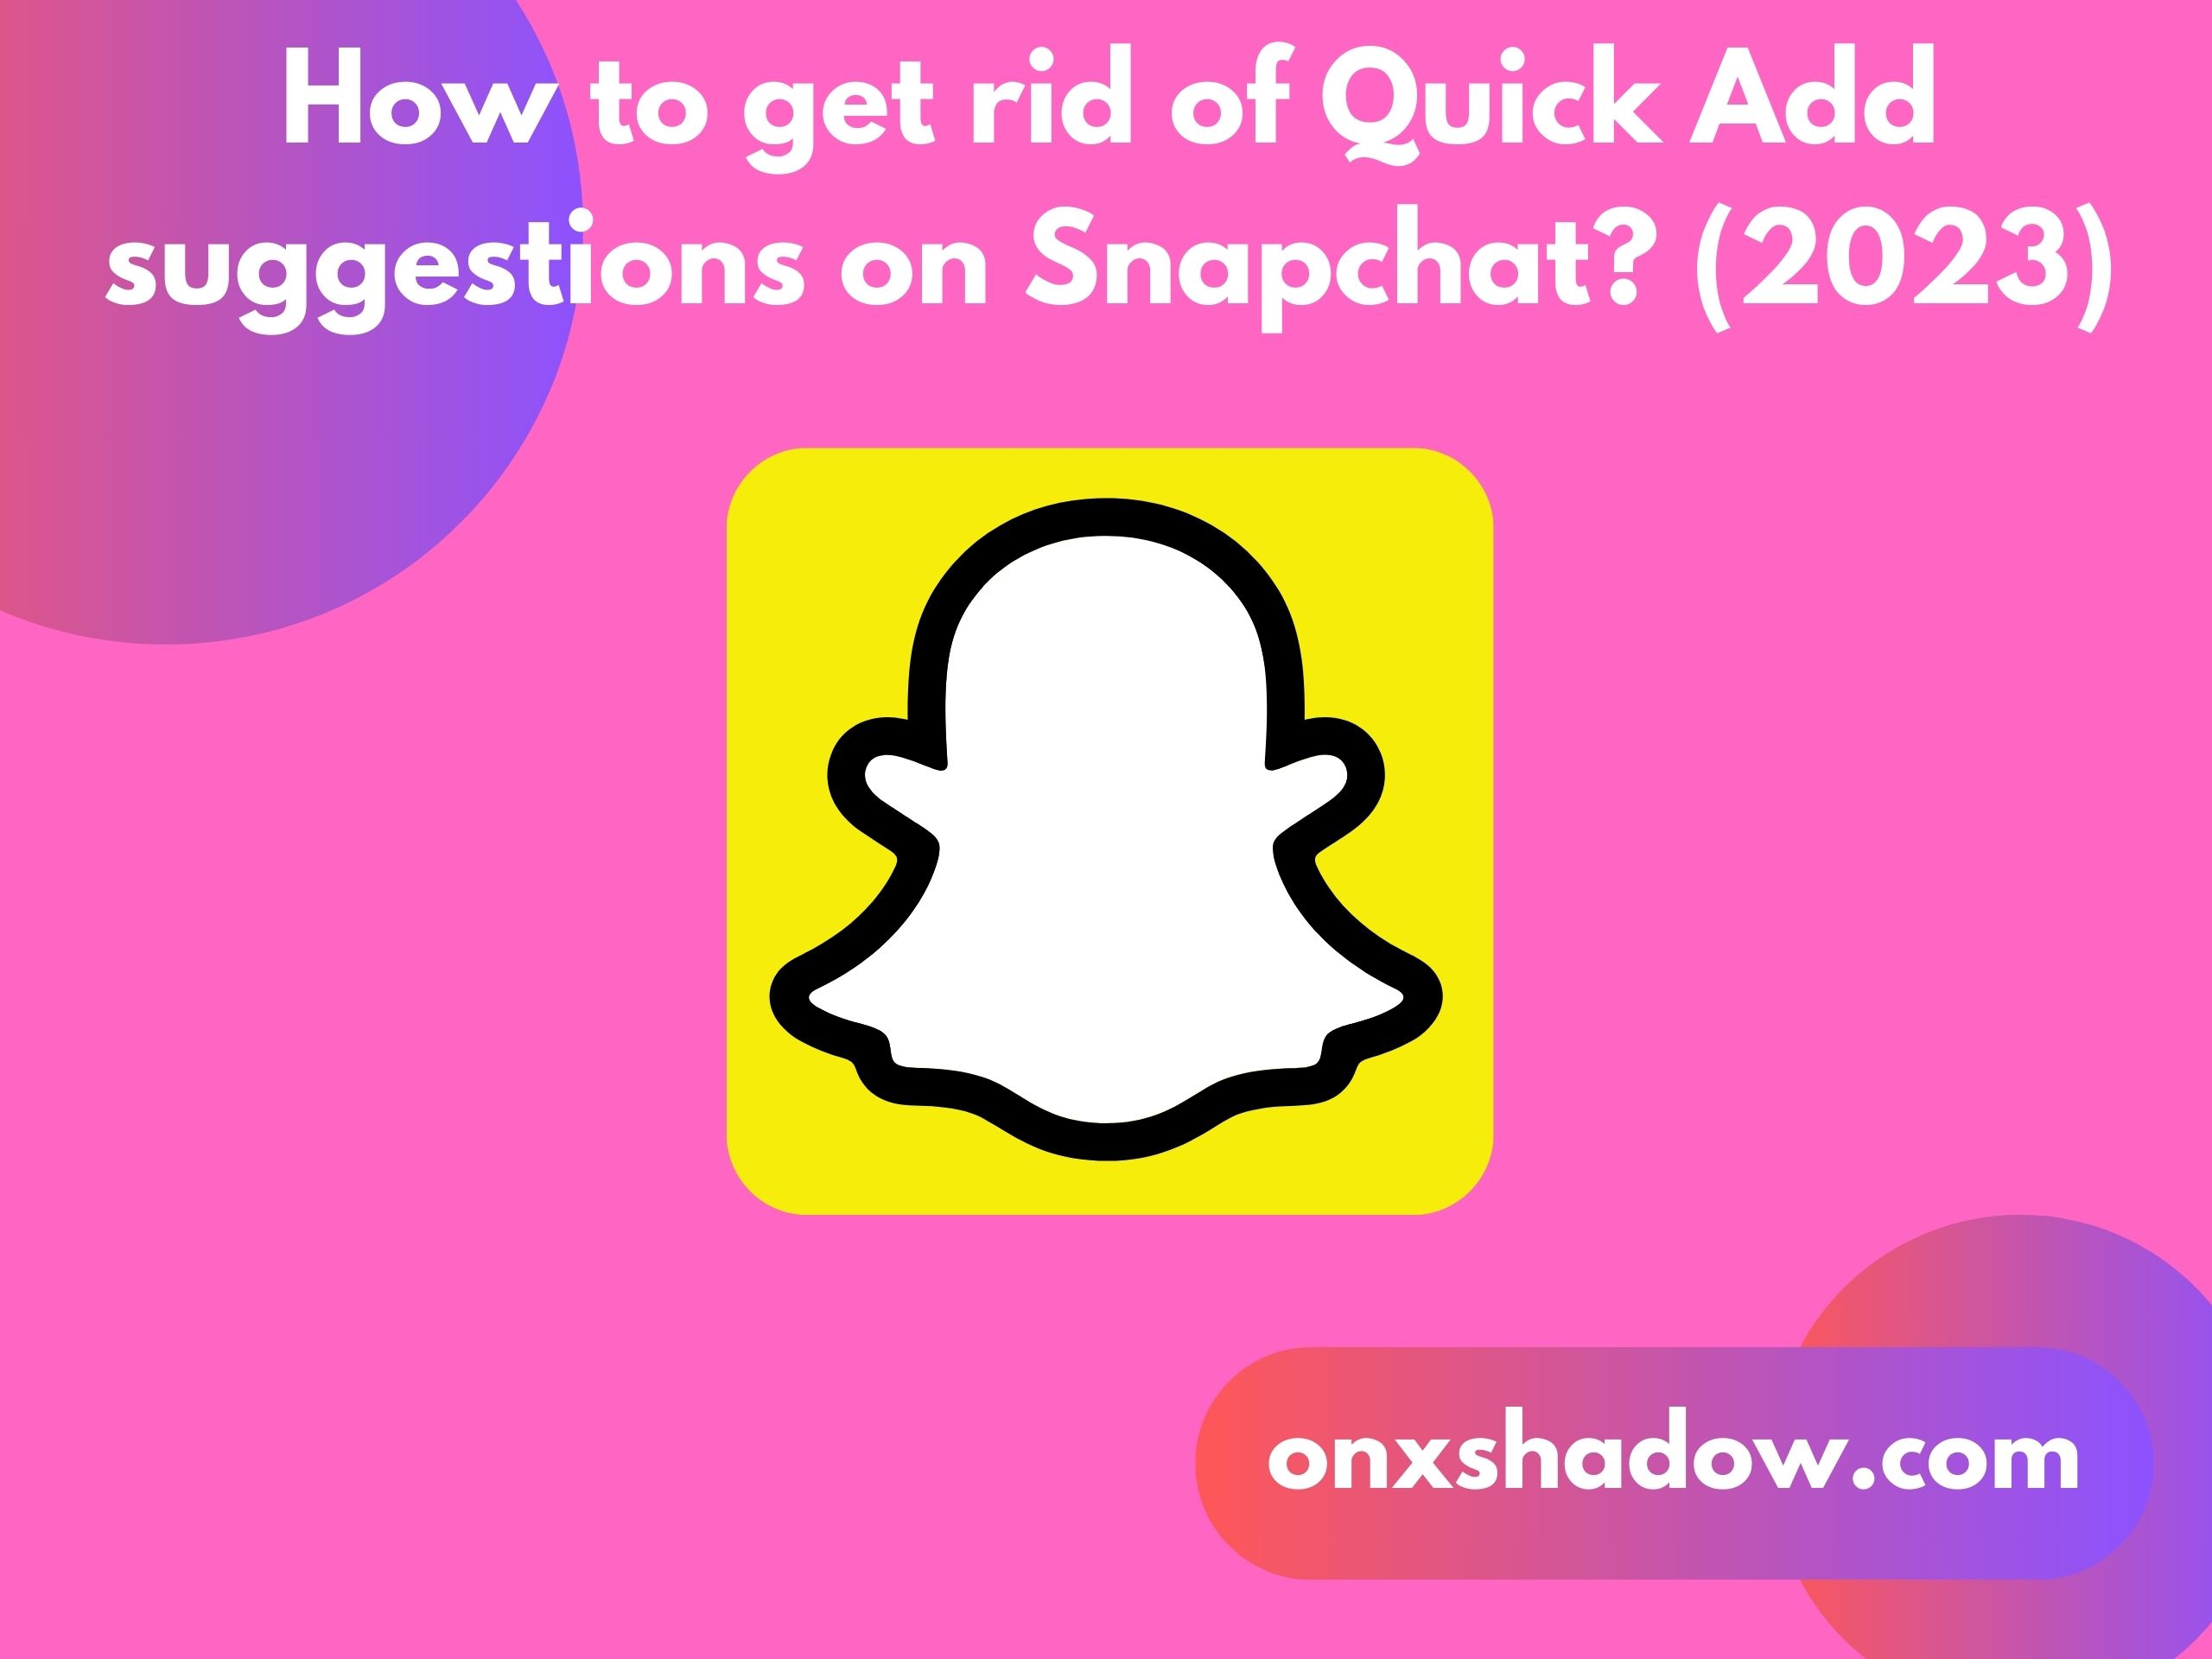 How to get rid of Quick Add suggestions on Snapchat? (2023)